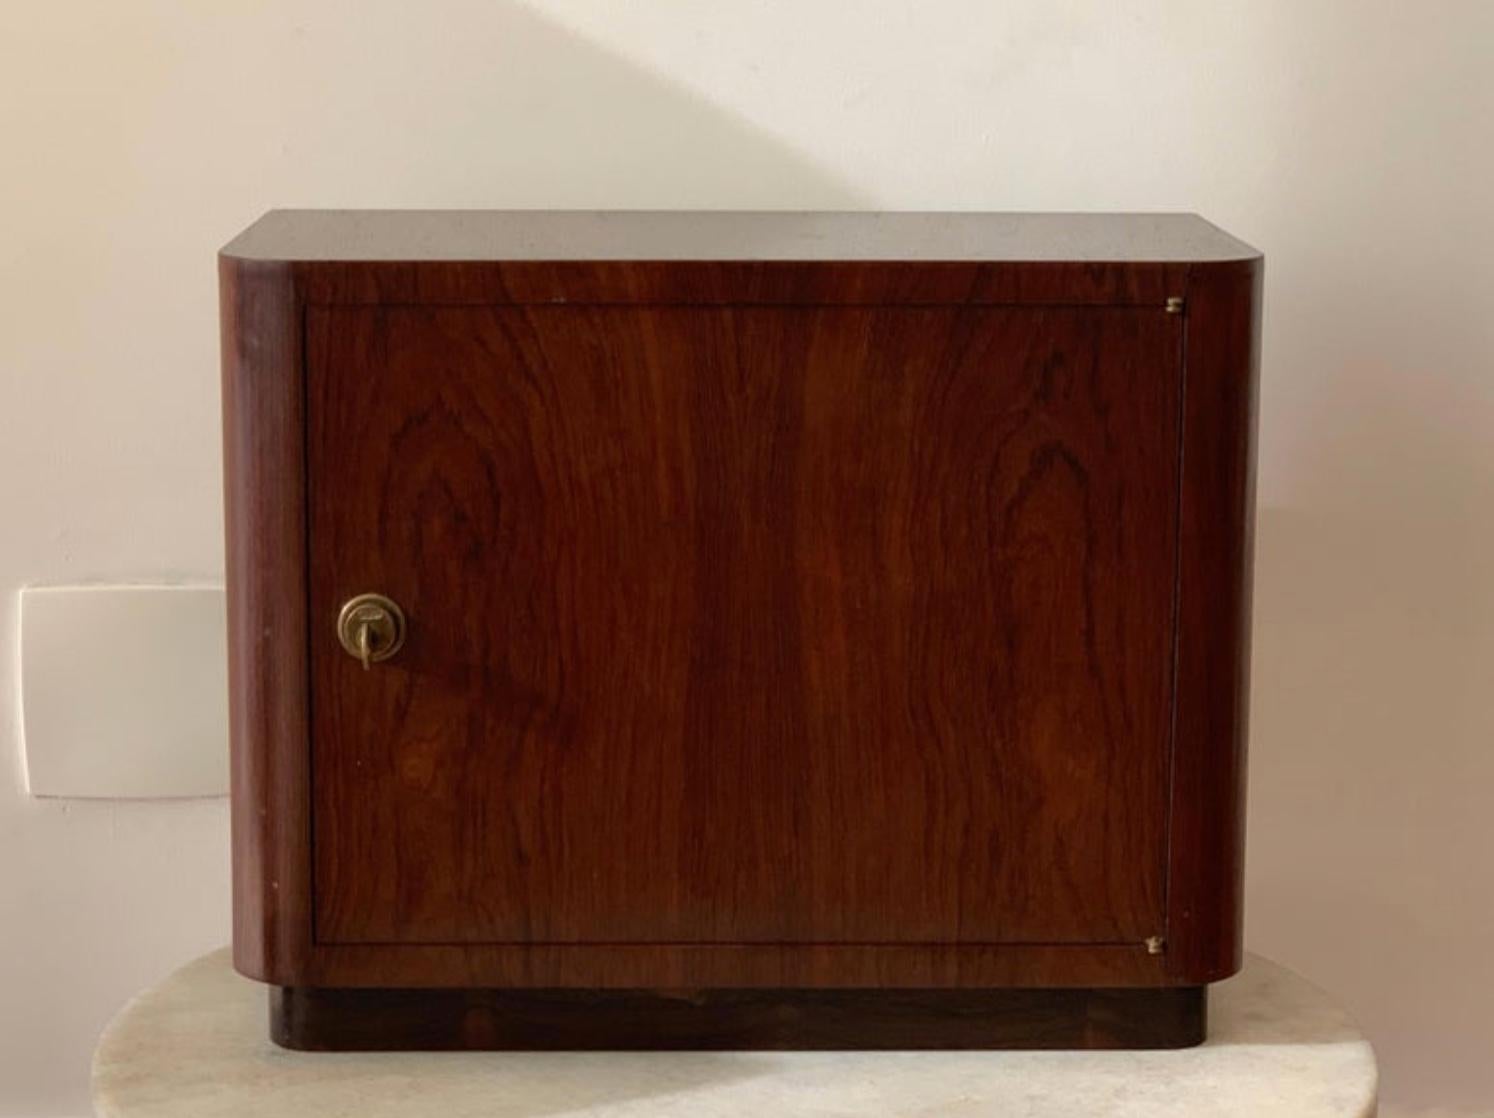 Exquisite Jacaranda jewelry chest by Joaquim Tenreiro, with original lock and key.

Joaquim Tenreiro (1906–1992) was among the leading furniture designers and visual artists in mid-20th century Brazil.

Tenreiro was born in Melo, Gouveia,